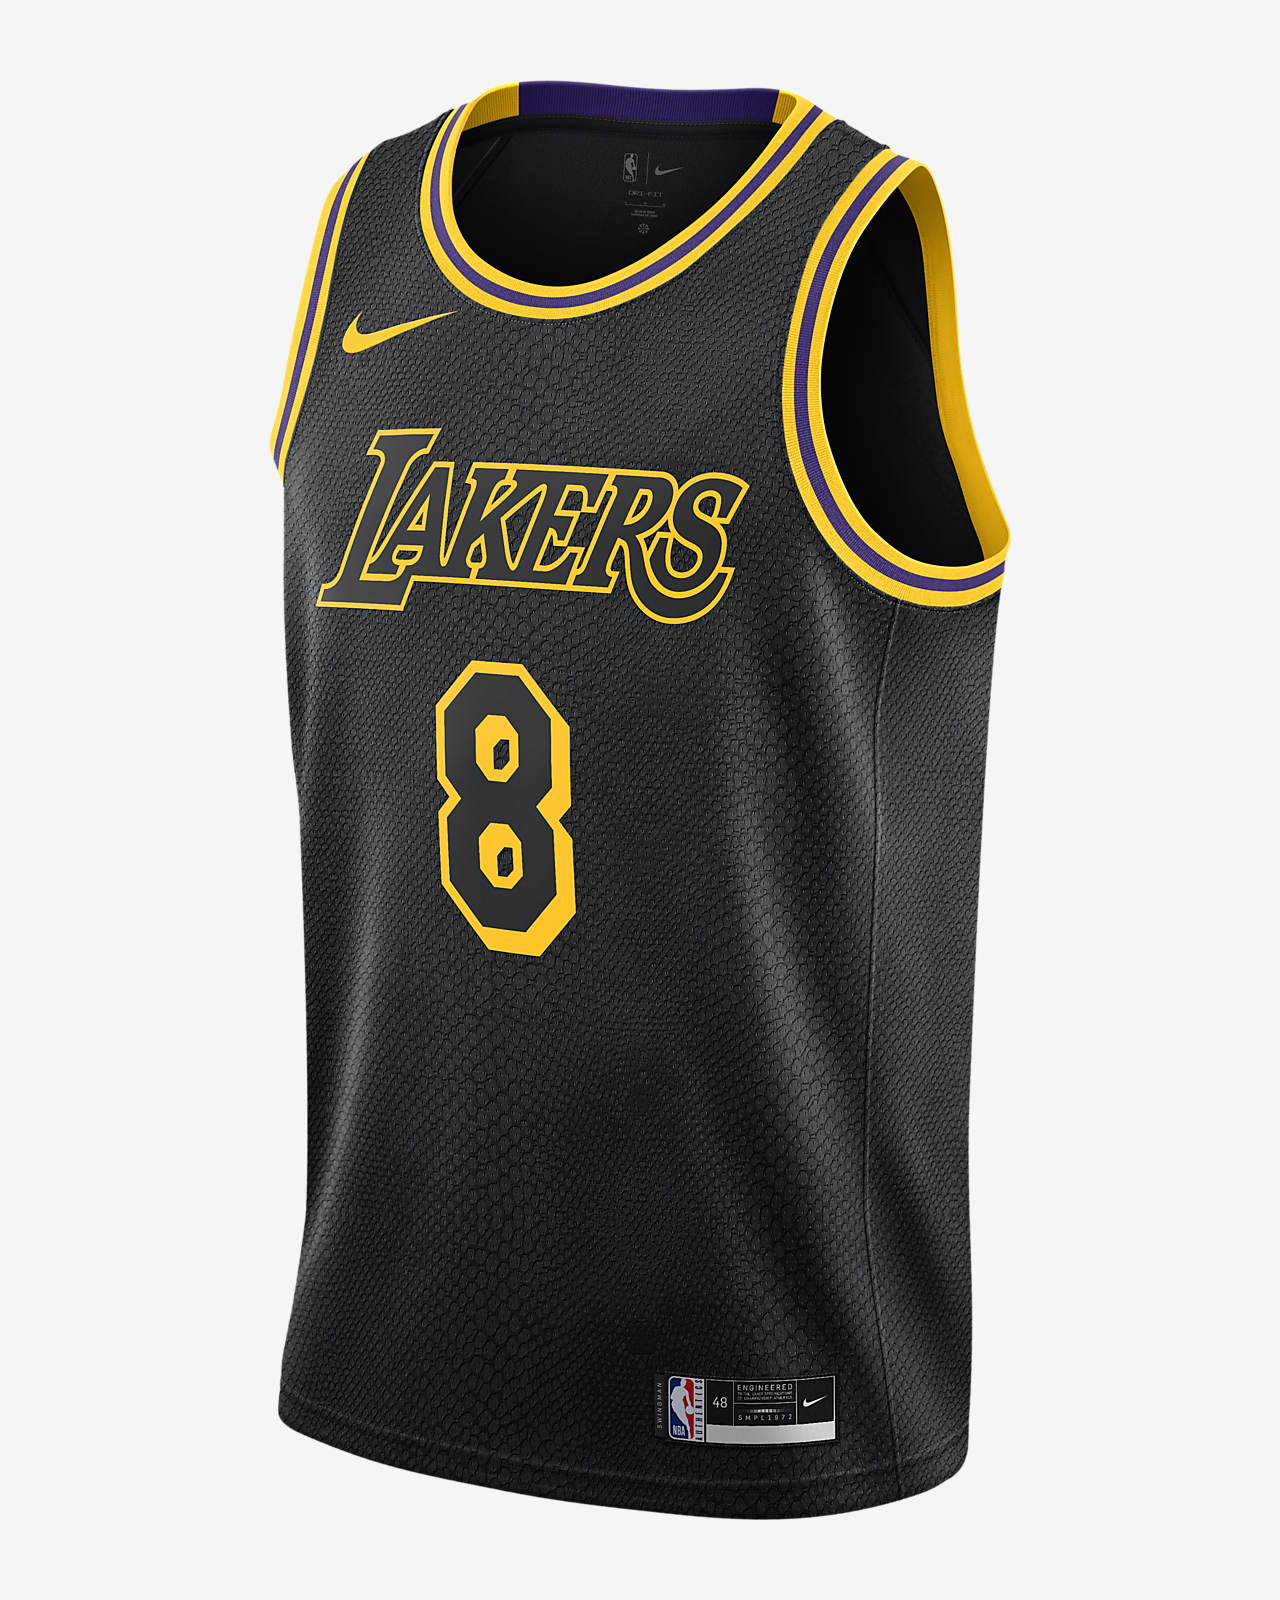 los angeles lakers jersey nike